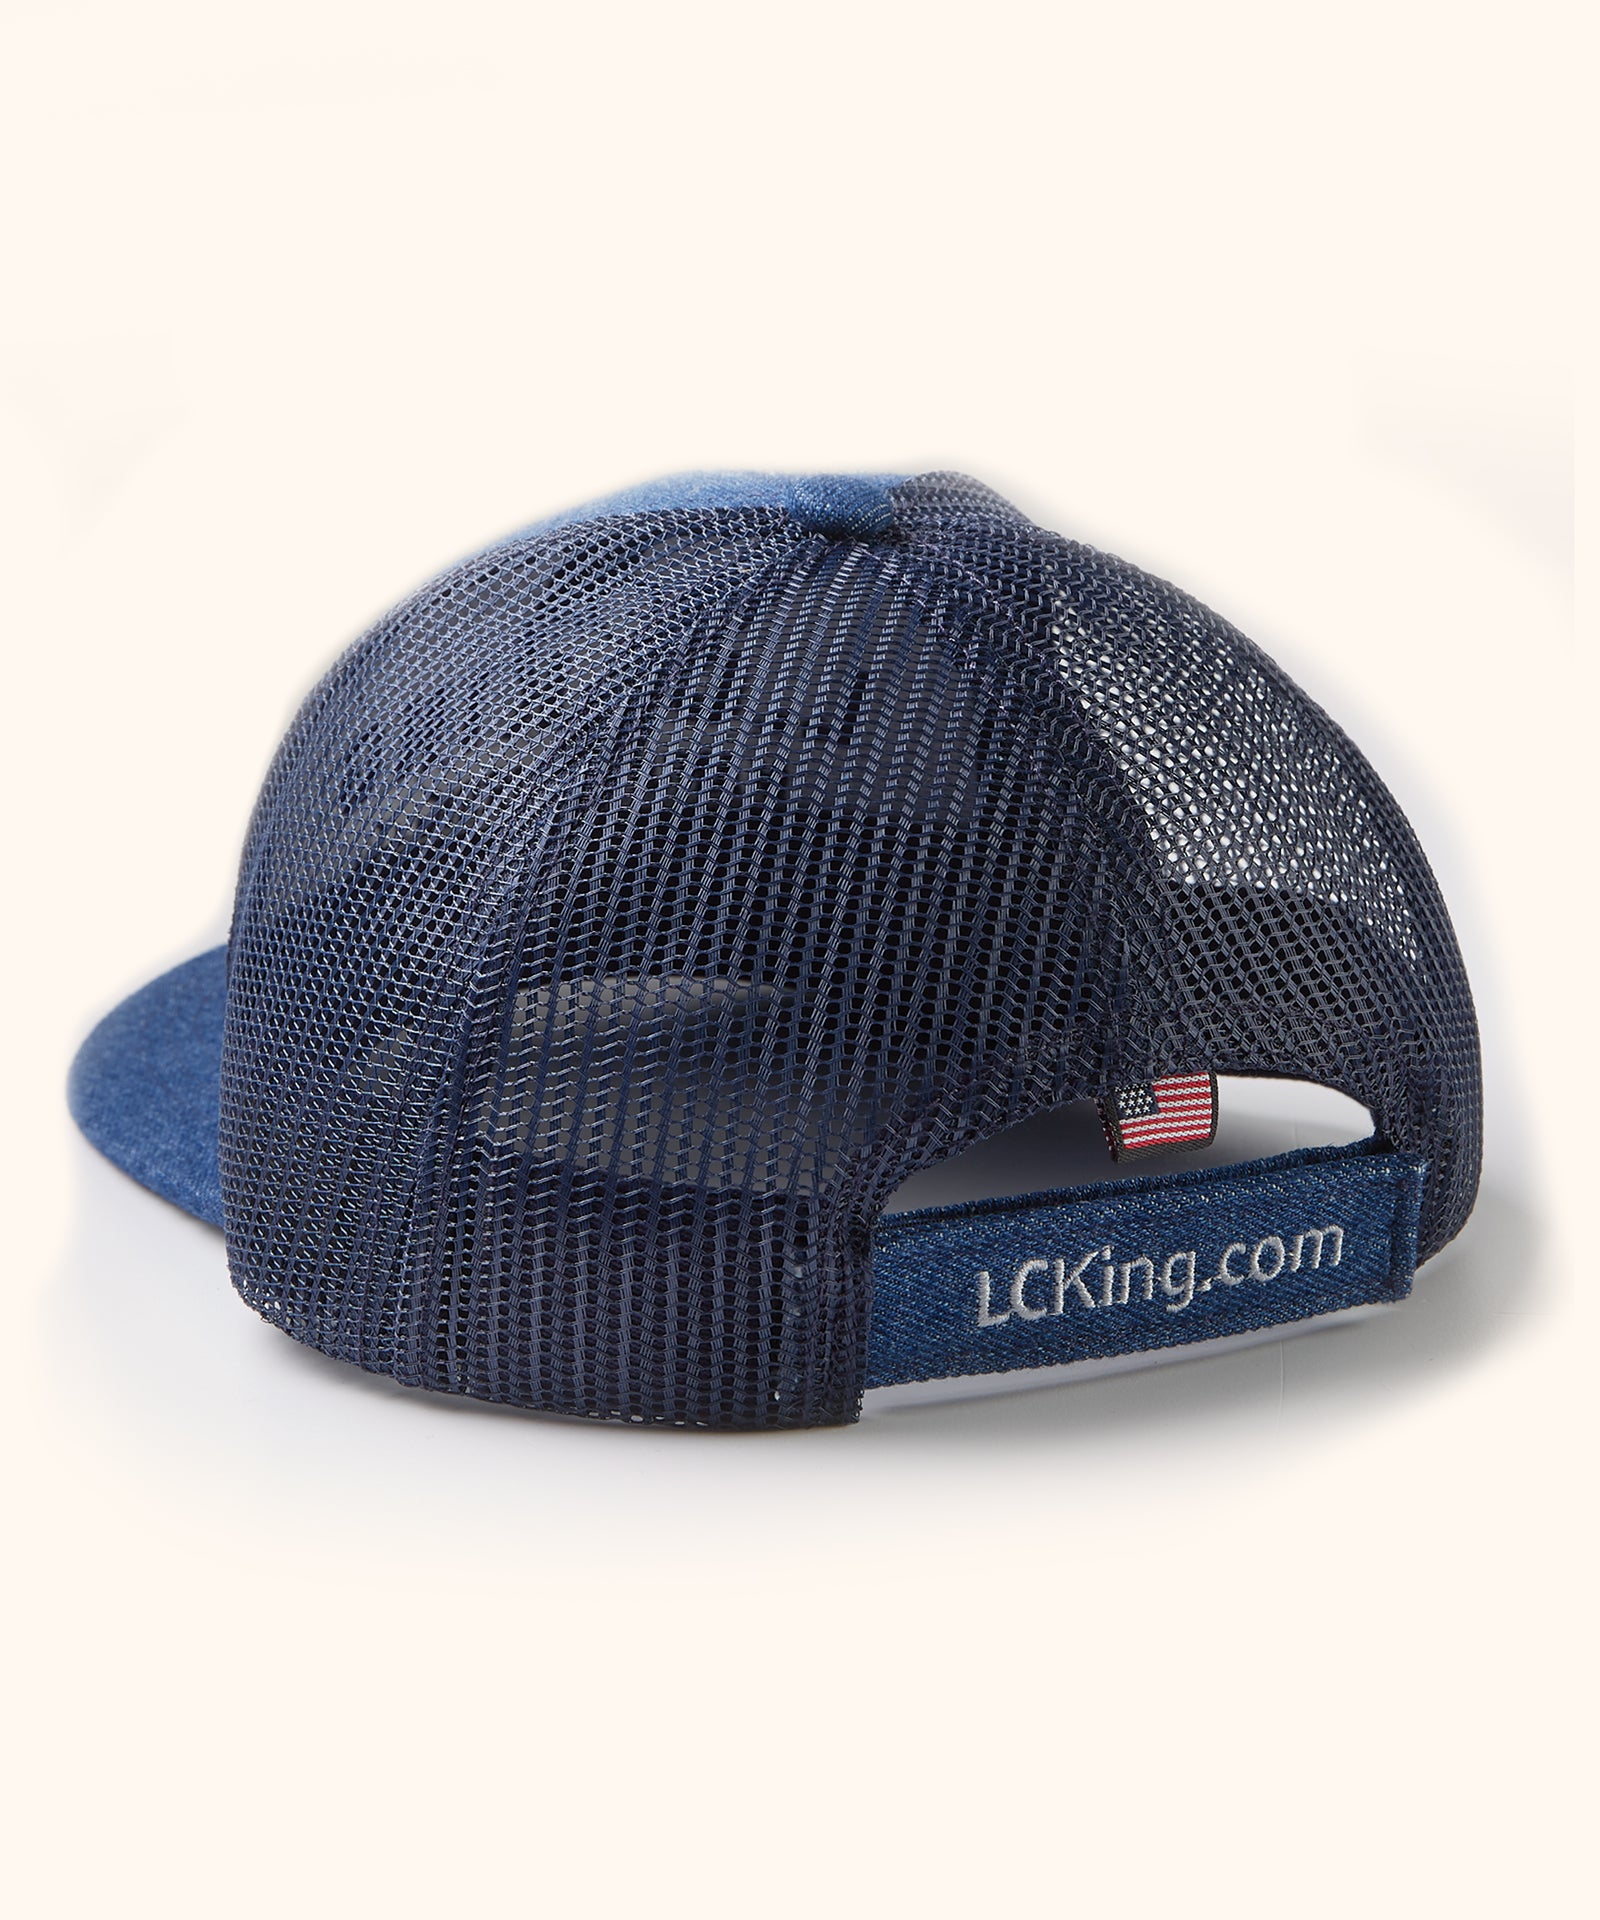 LC King Cap with Mesh Back